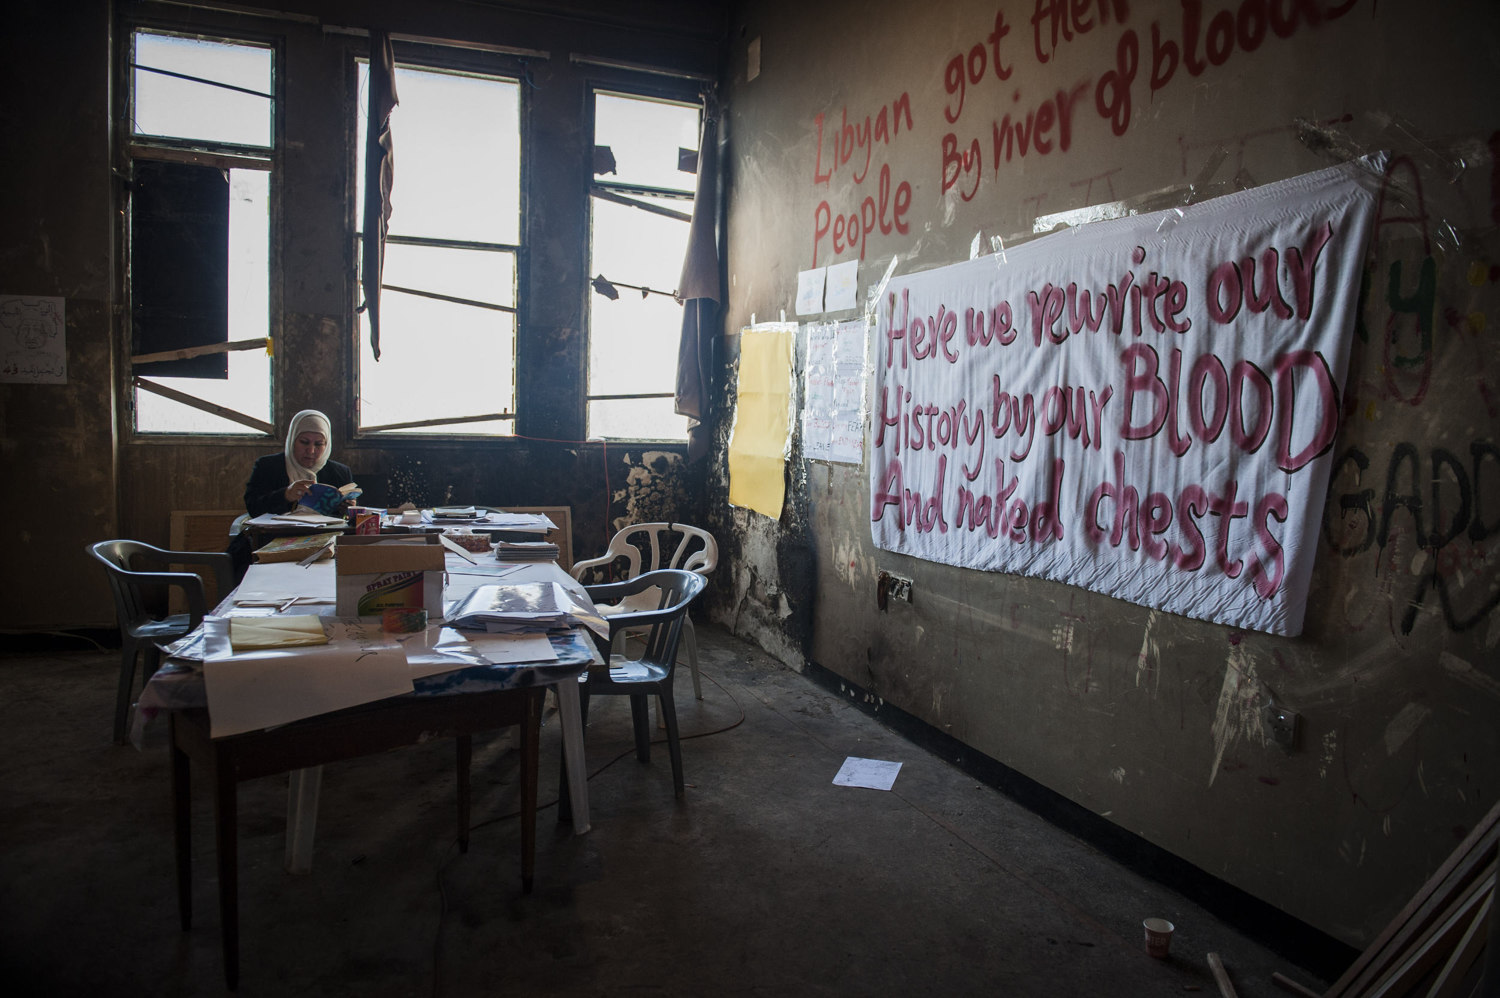  A woman reads a book in a room used to make signs and propaganda in the 17th of February Revolution Media Center. 